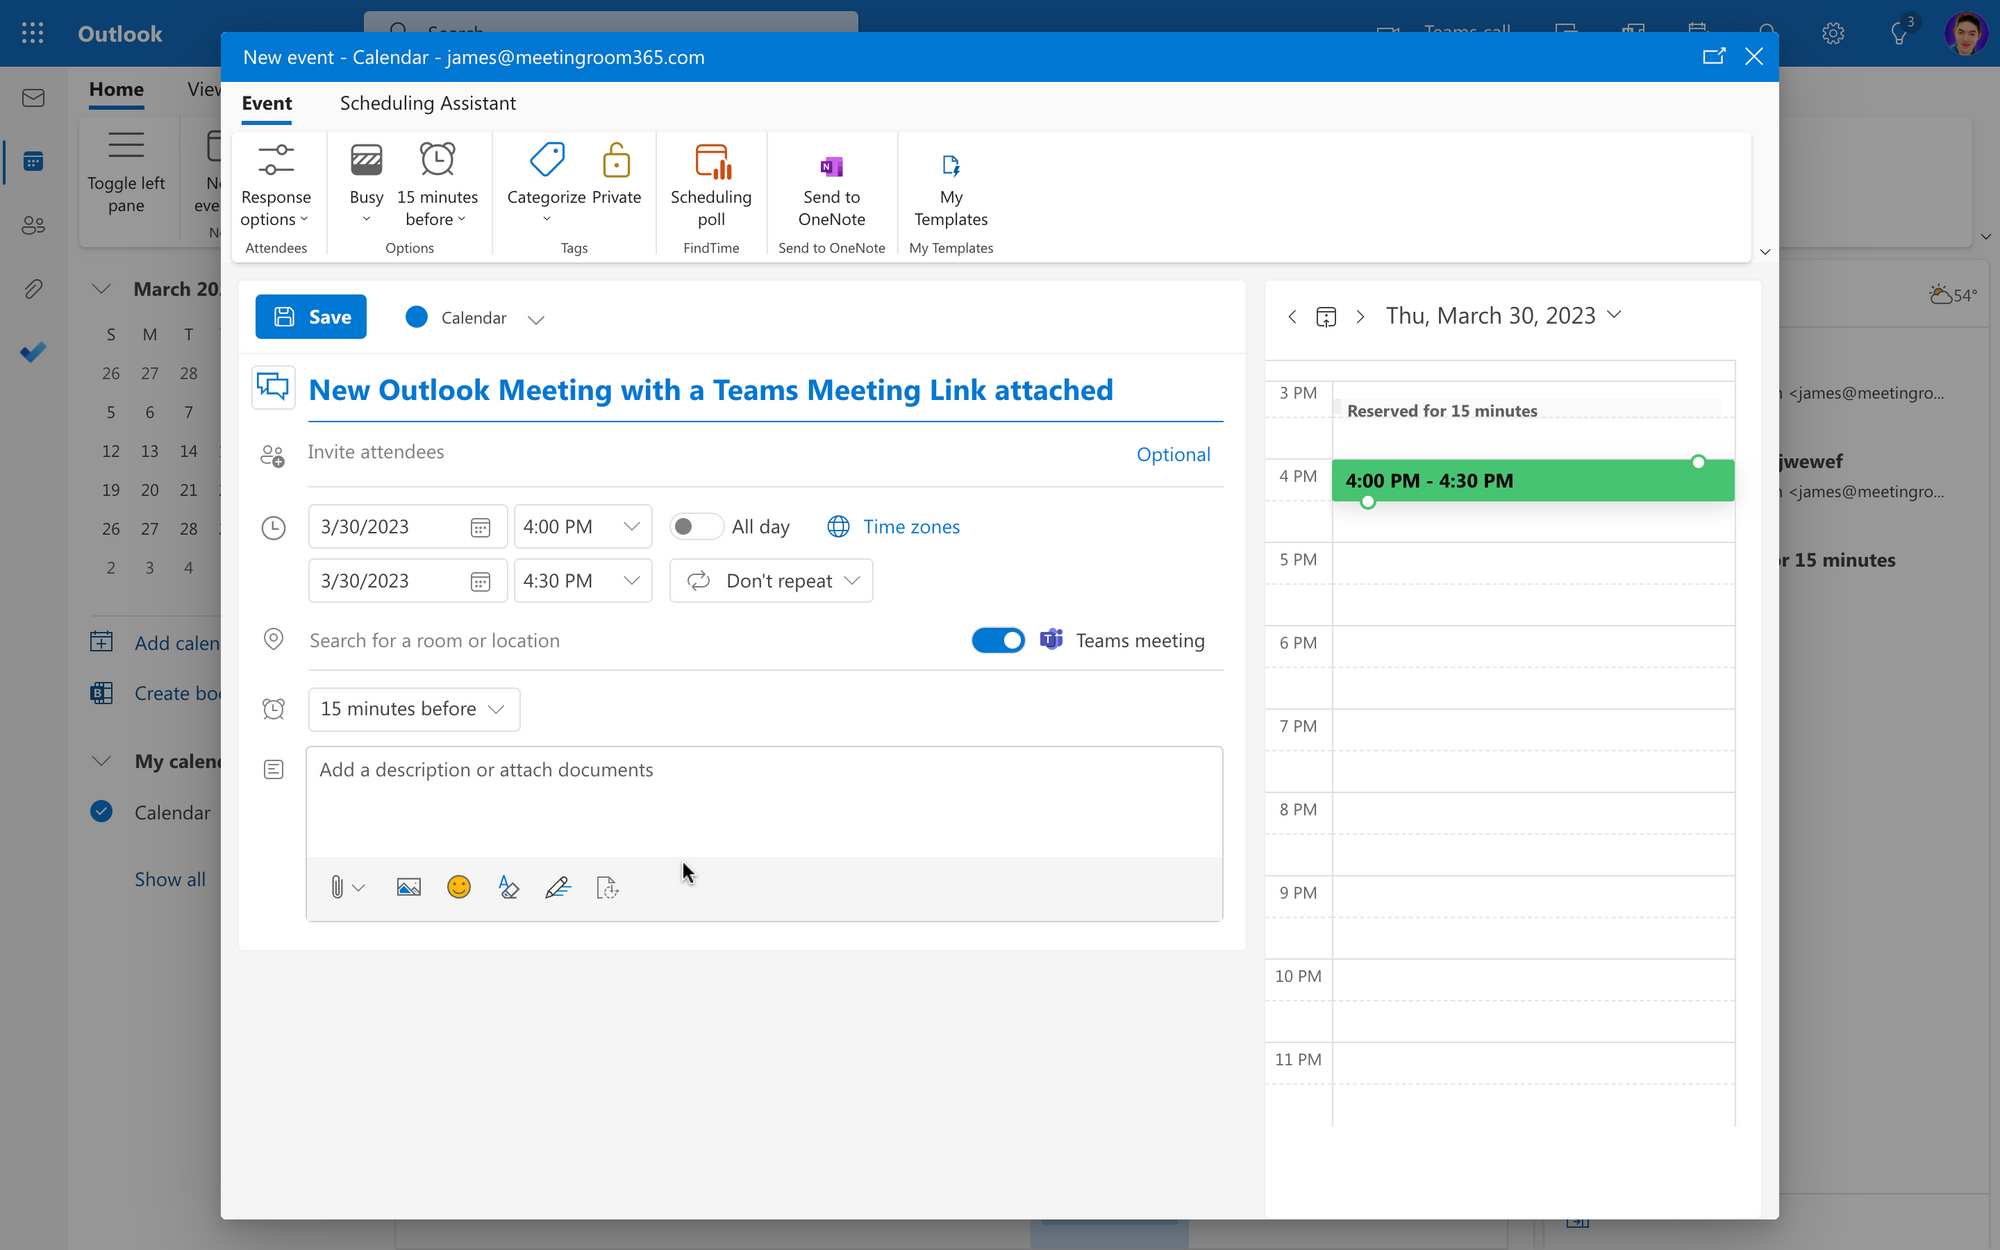 How to Set Up a Teams Meeting in Outlook